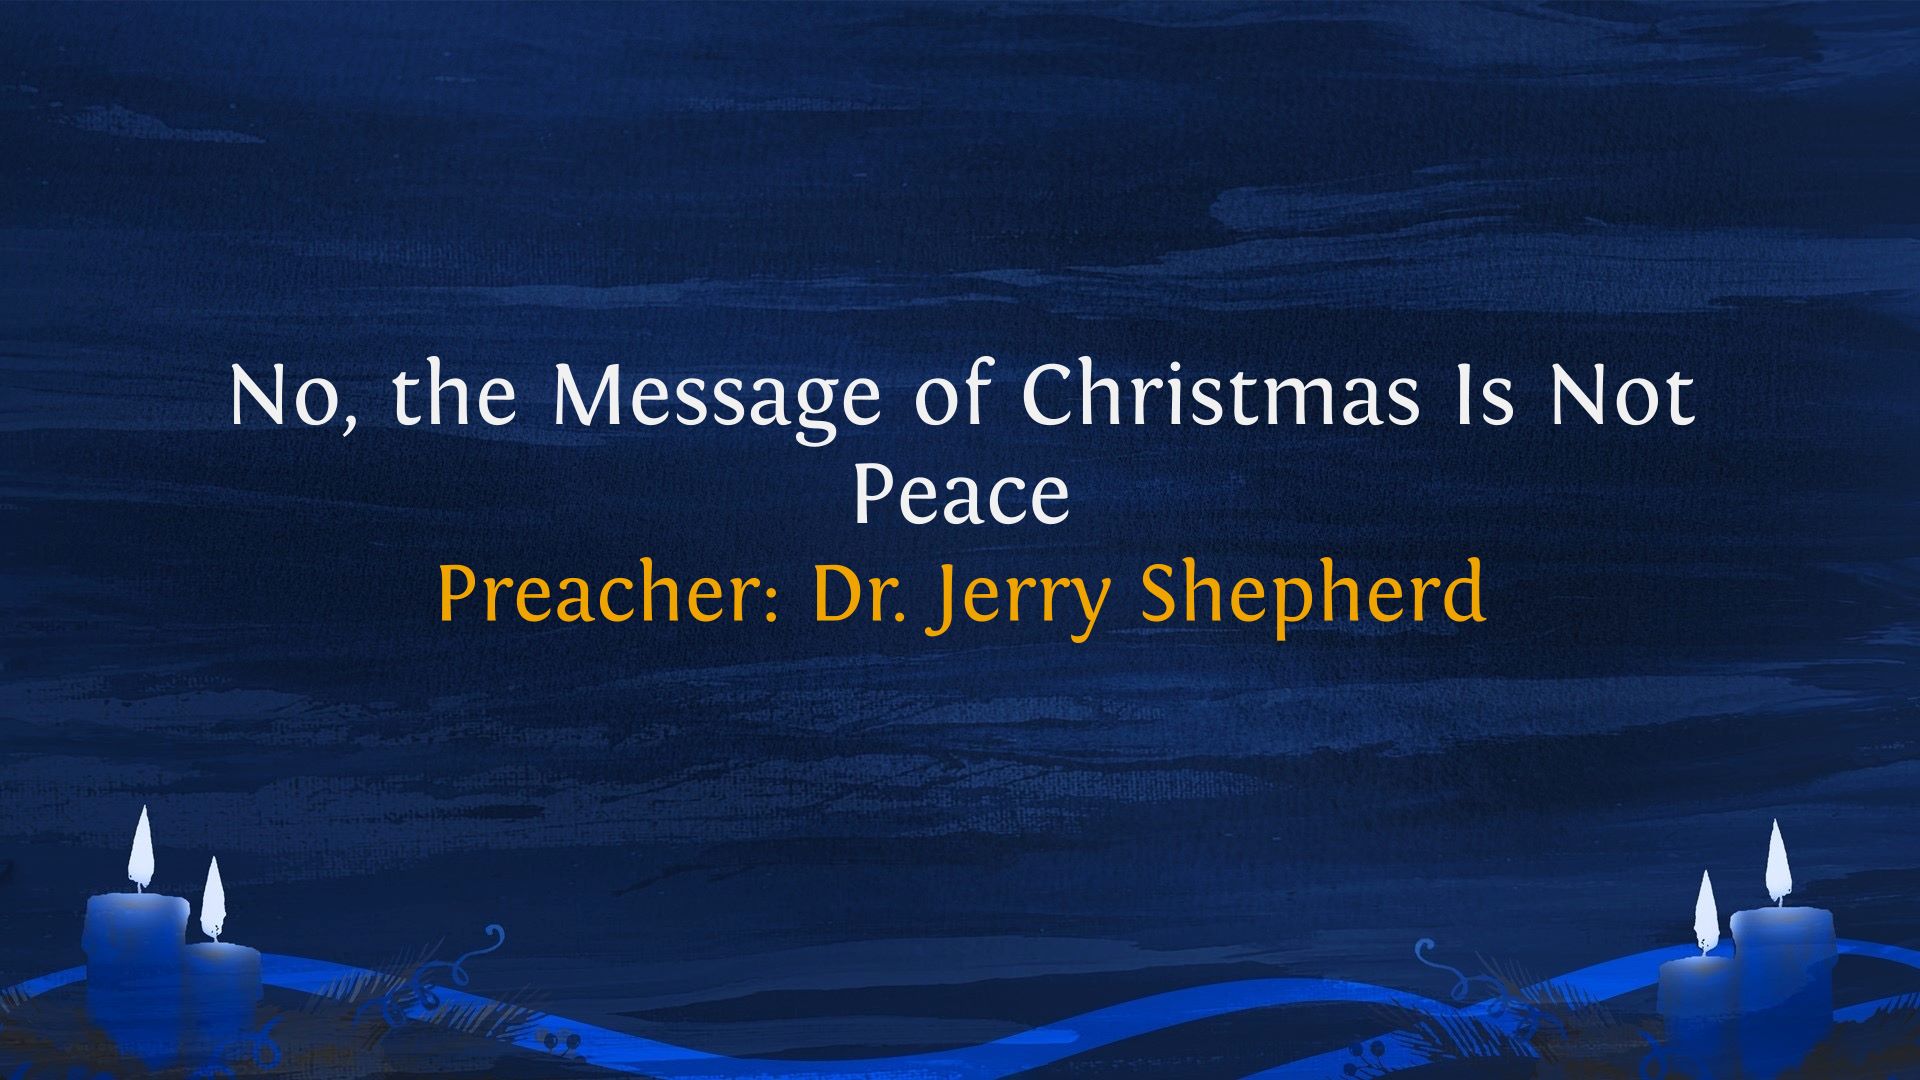 No, the Message of Christmas Is Not Peace